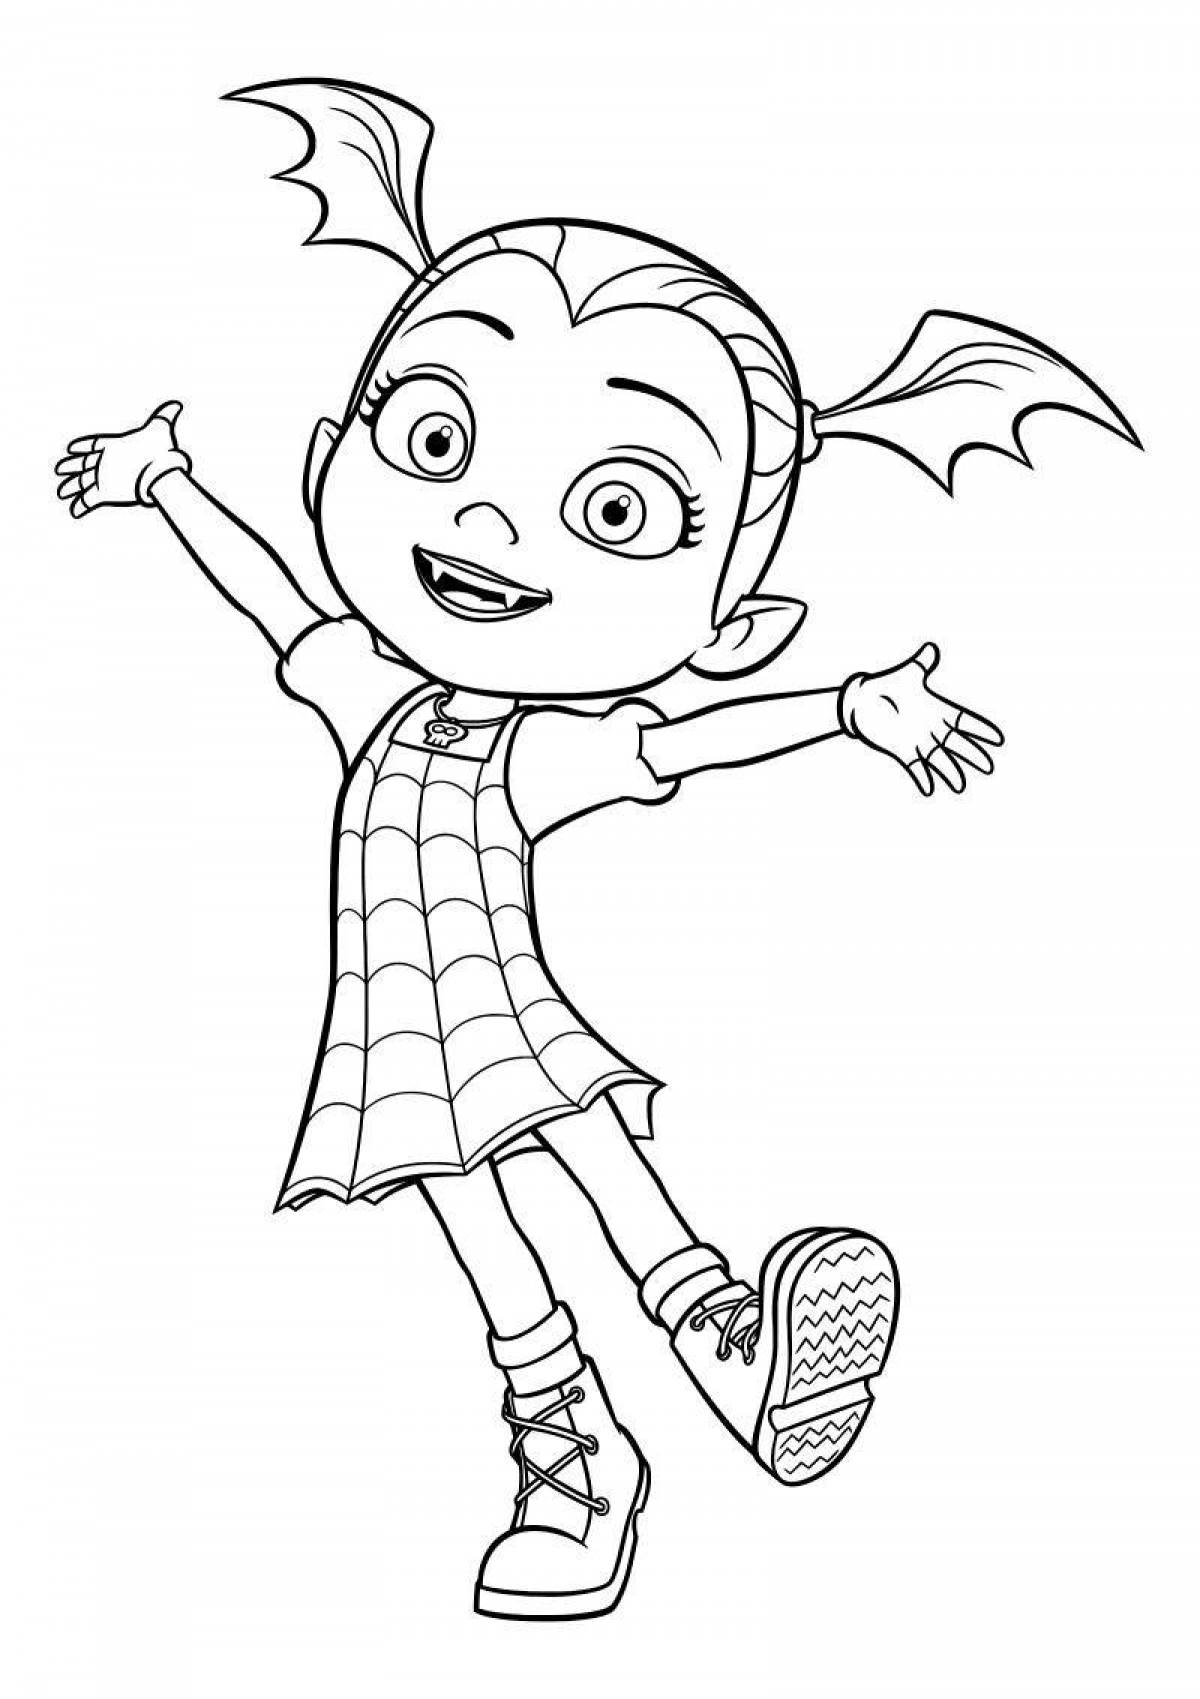 Color filled pj coloring page